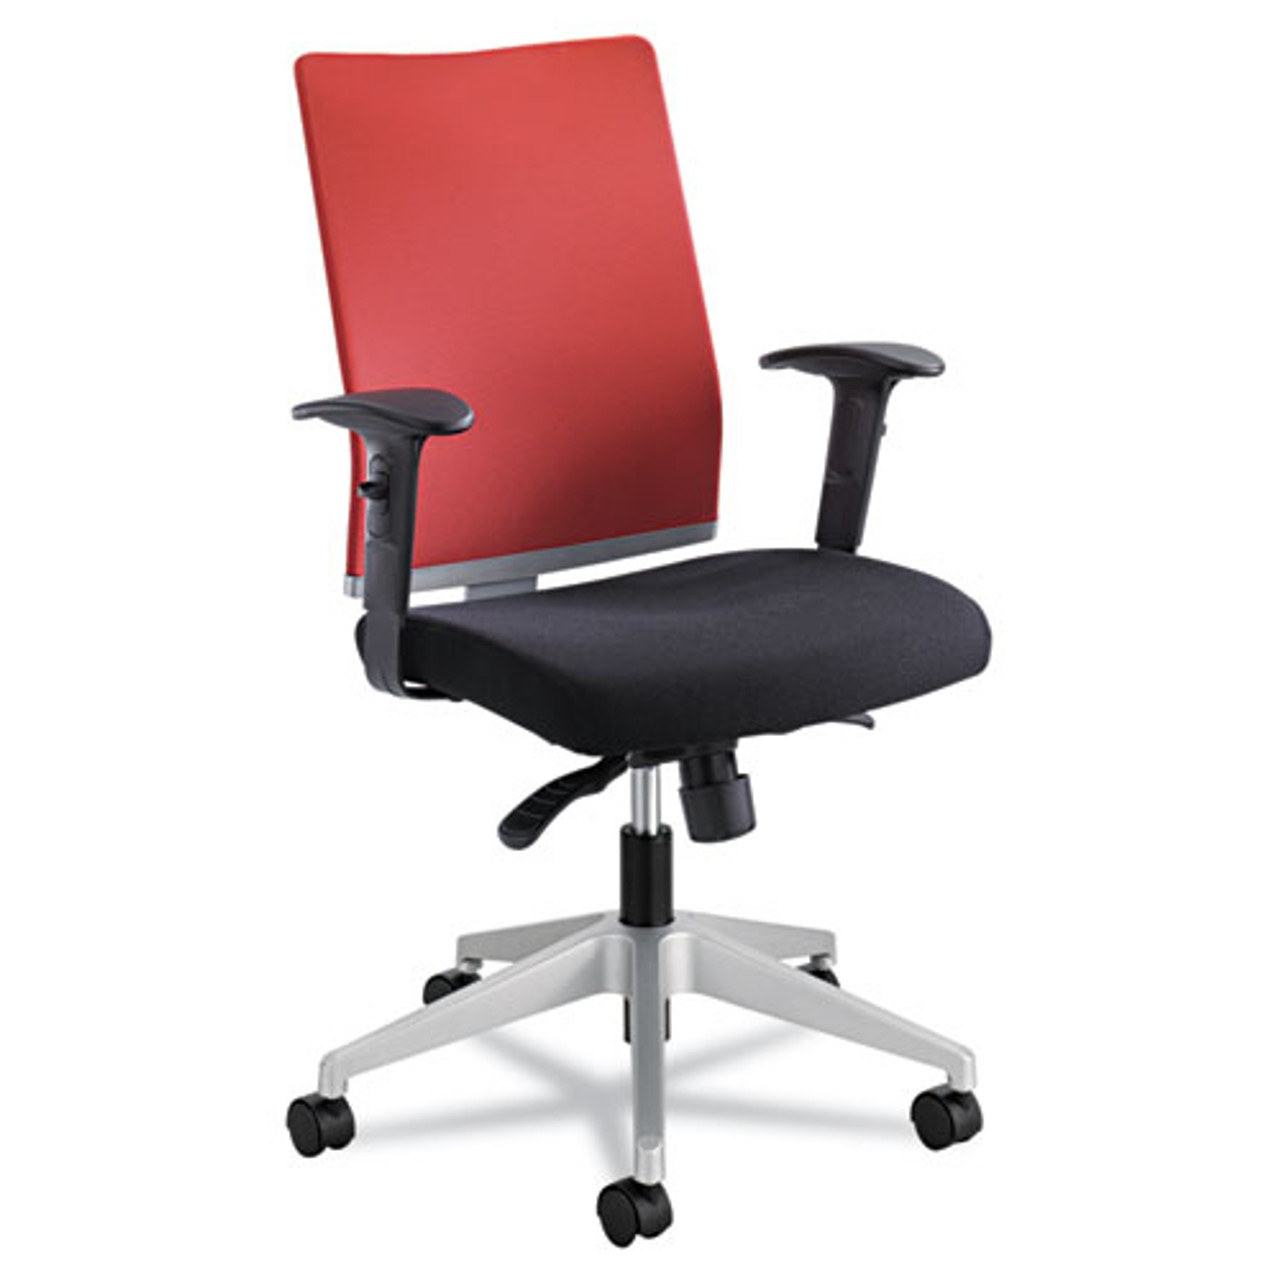 Tez Series Manager Synchro-Tilt Task Chair, Red Mesh Back, Black Fabric Seat, #SF-5920-TA